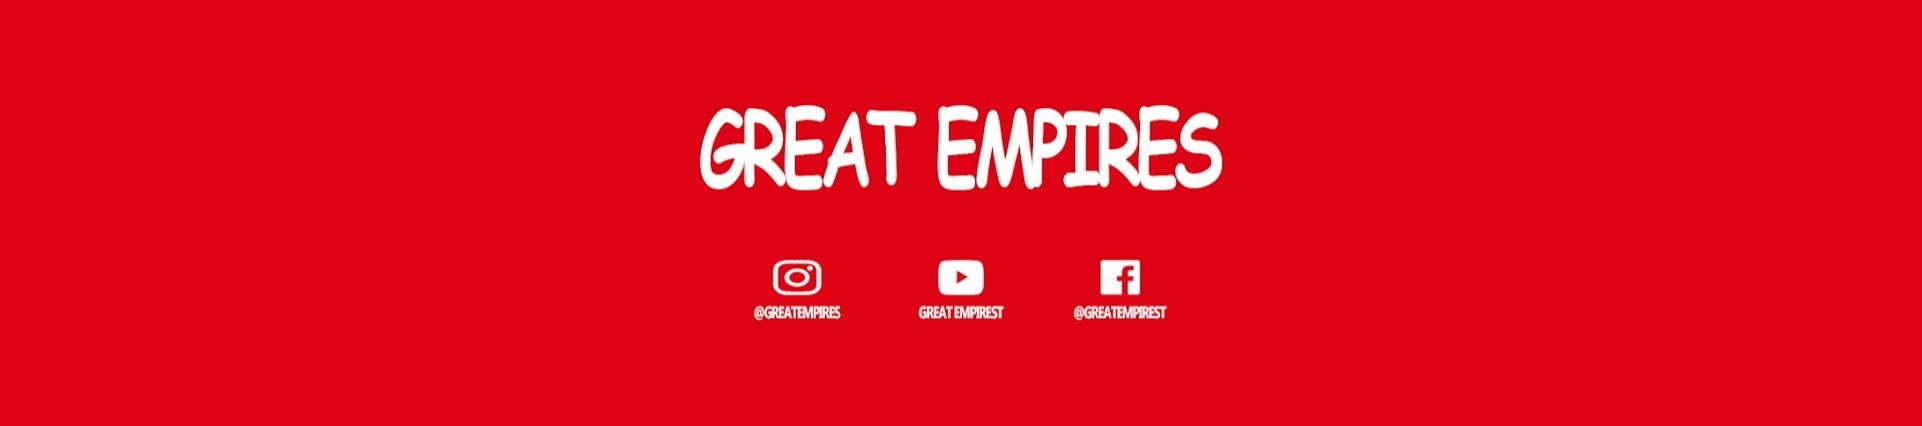 Great Empires